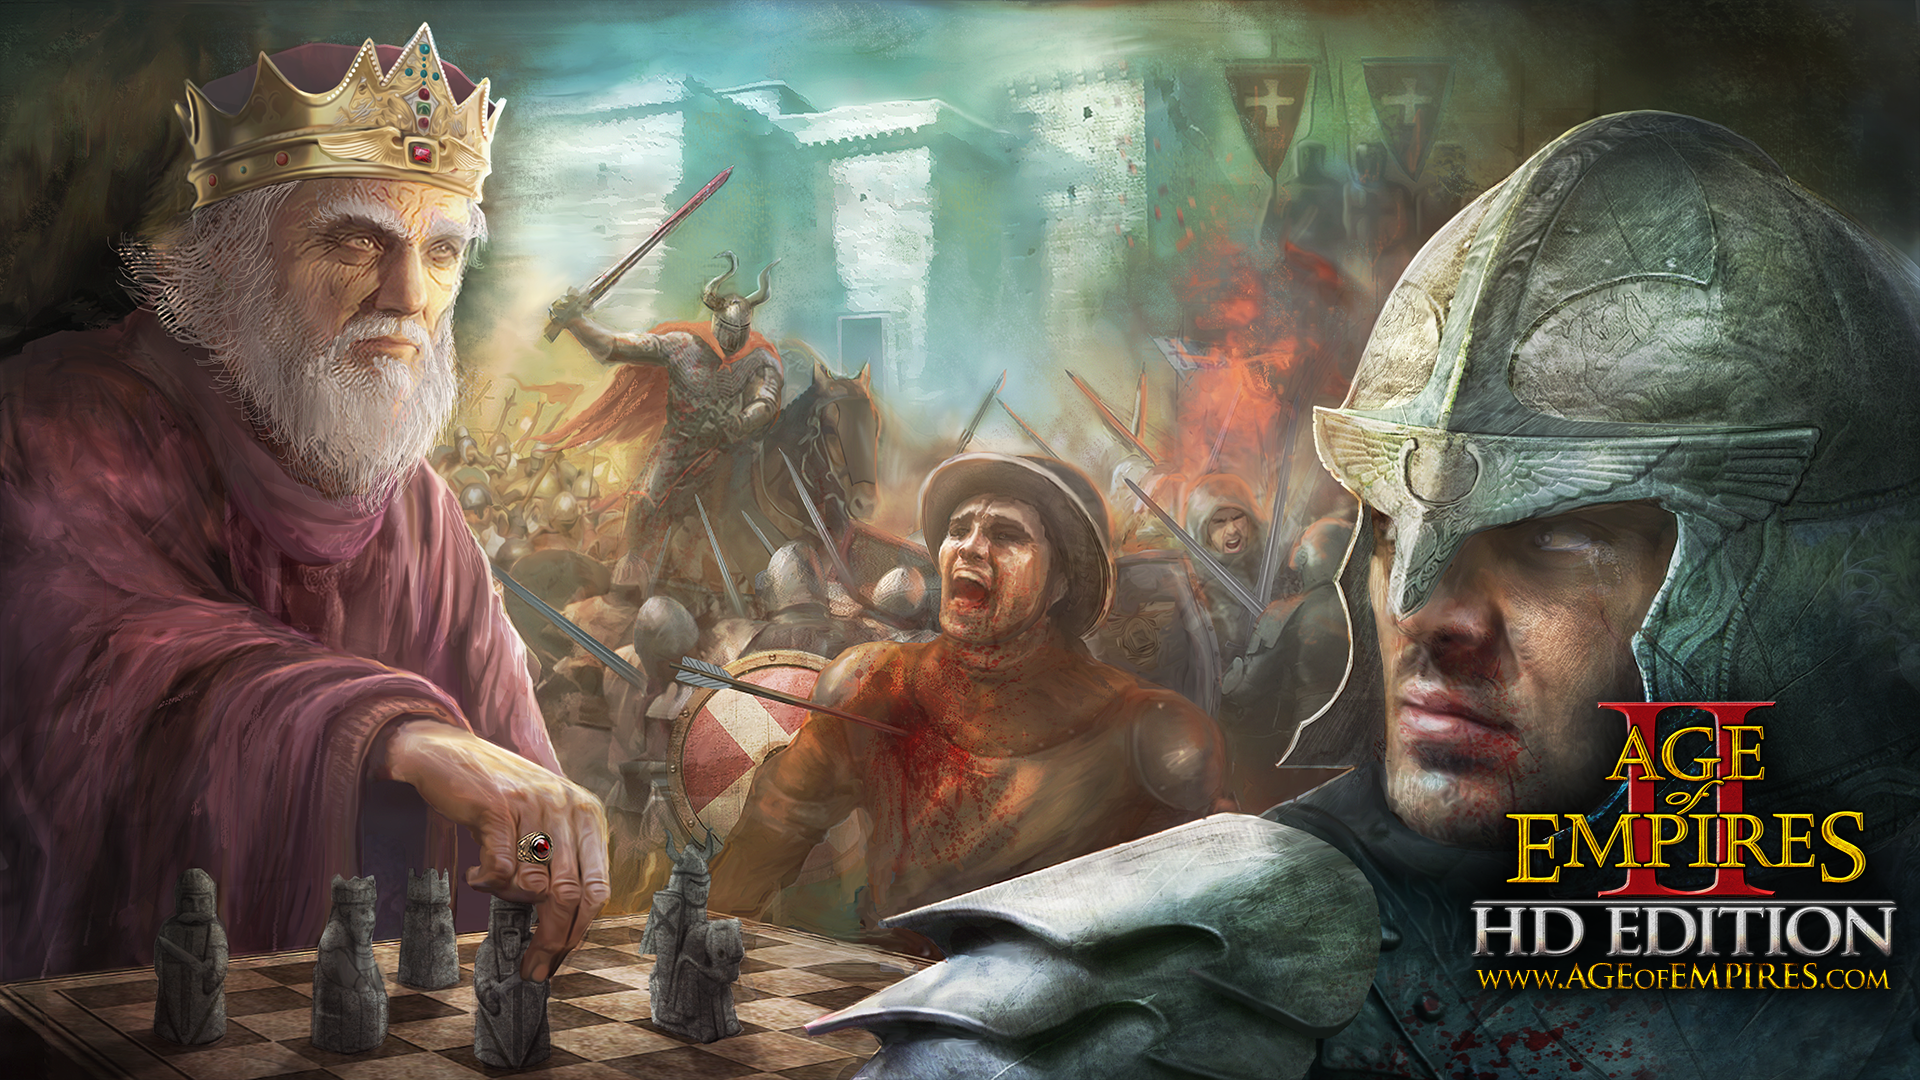 age of empires wallpaper,games,action adventure game,strategy video game,mythology,pc game